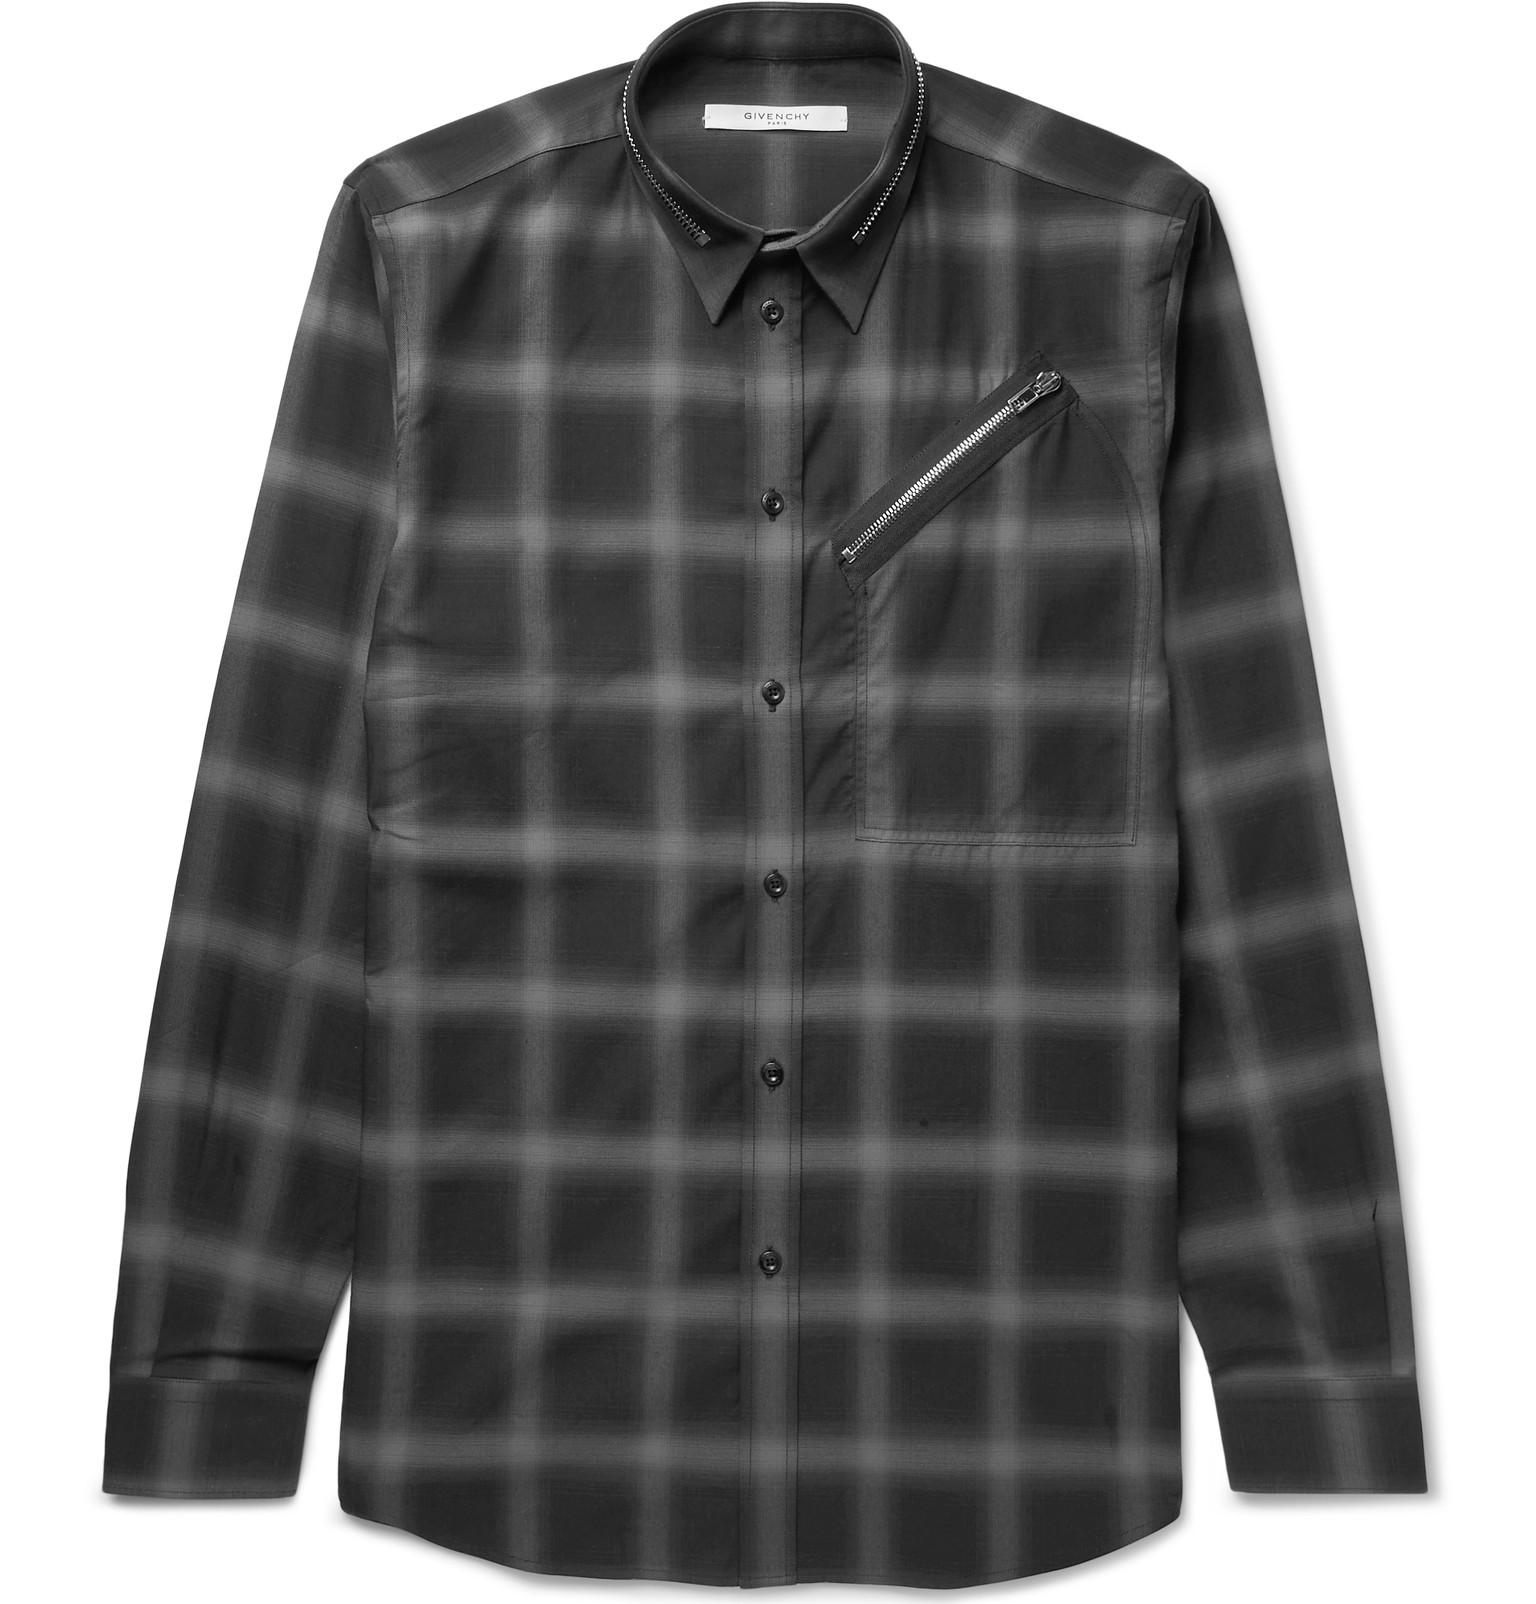 Lyst - Givenchy Checked Cotton Shirt in Gray for Men